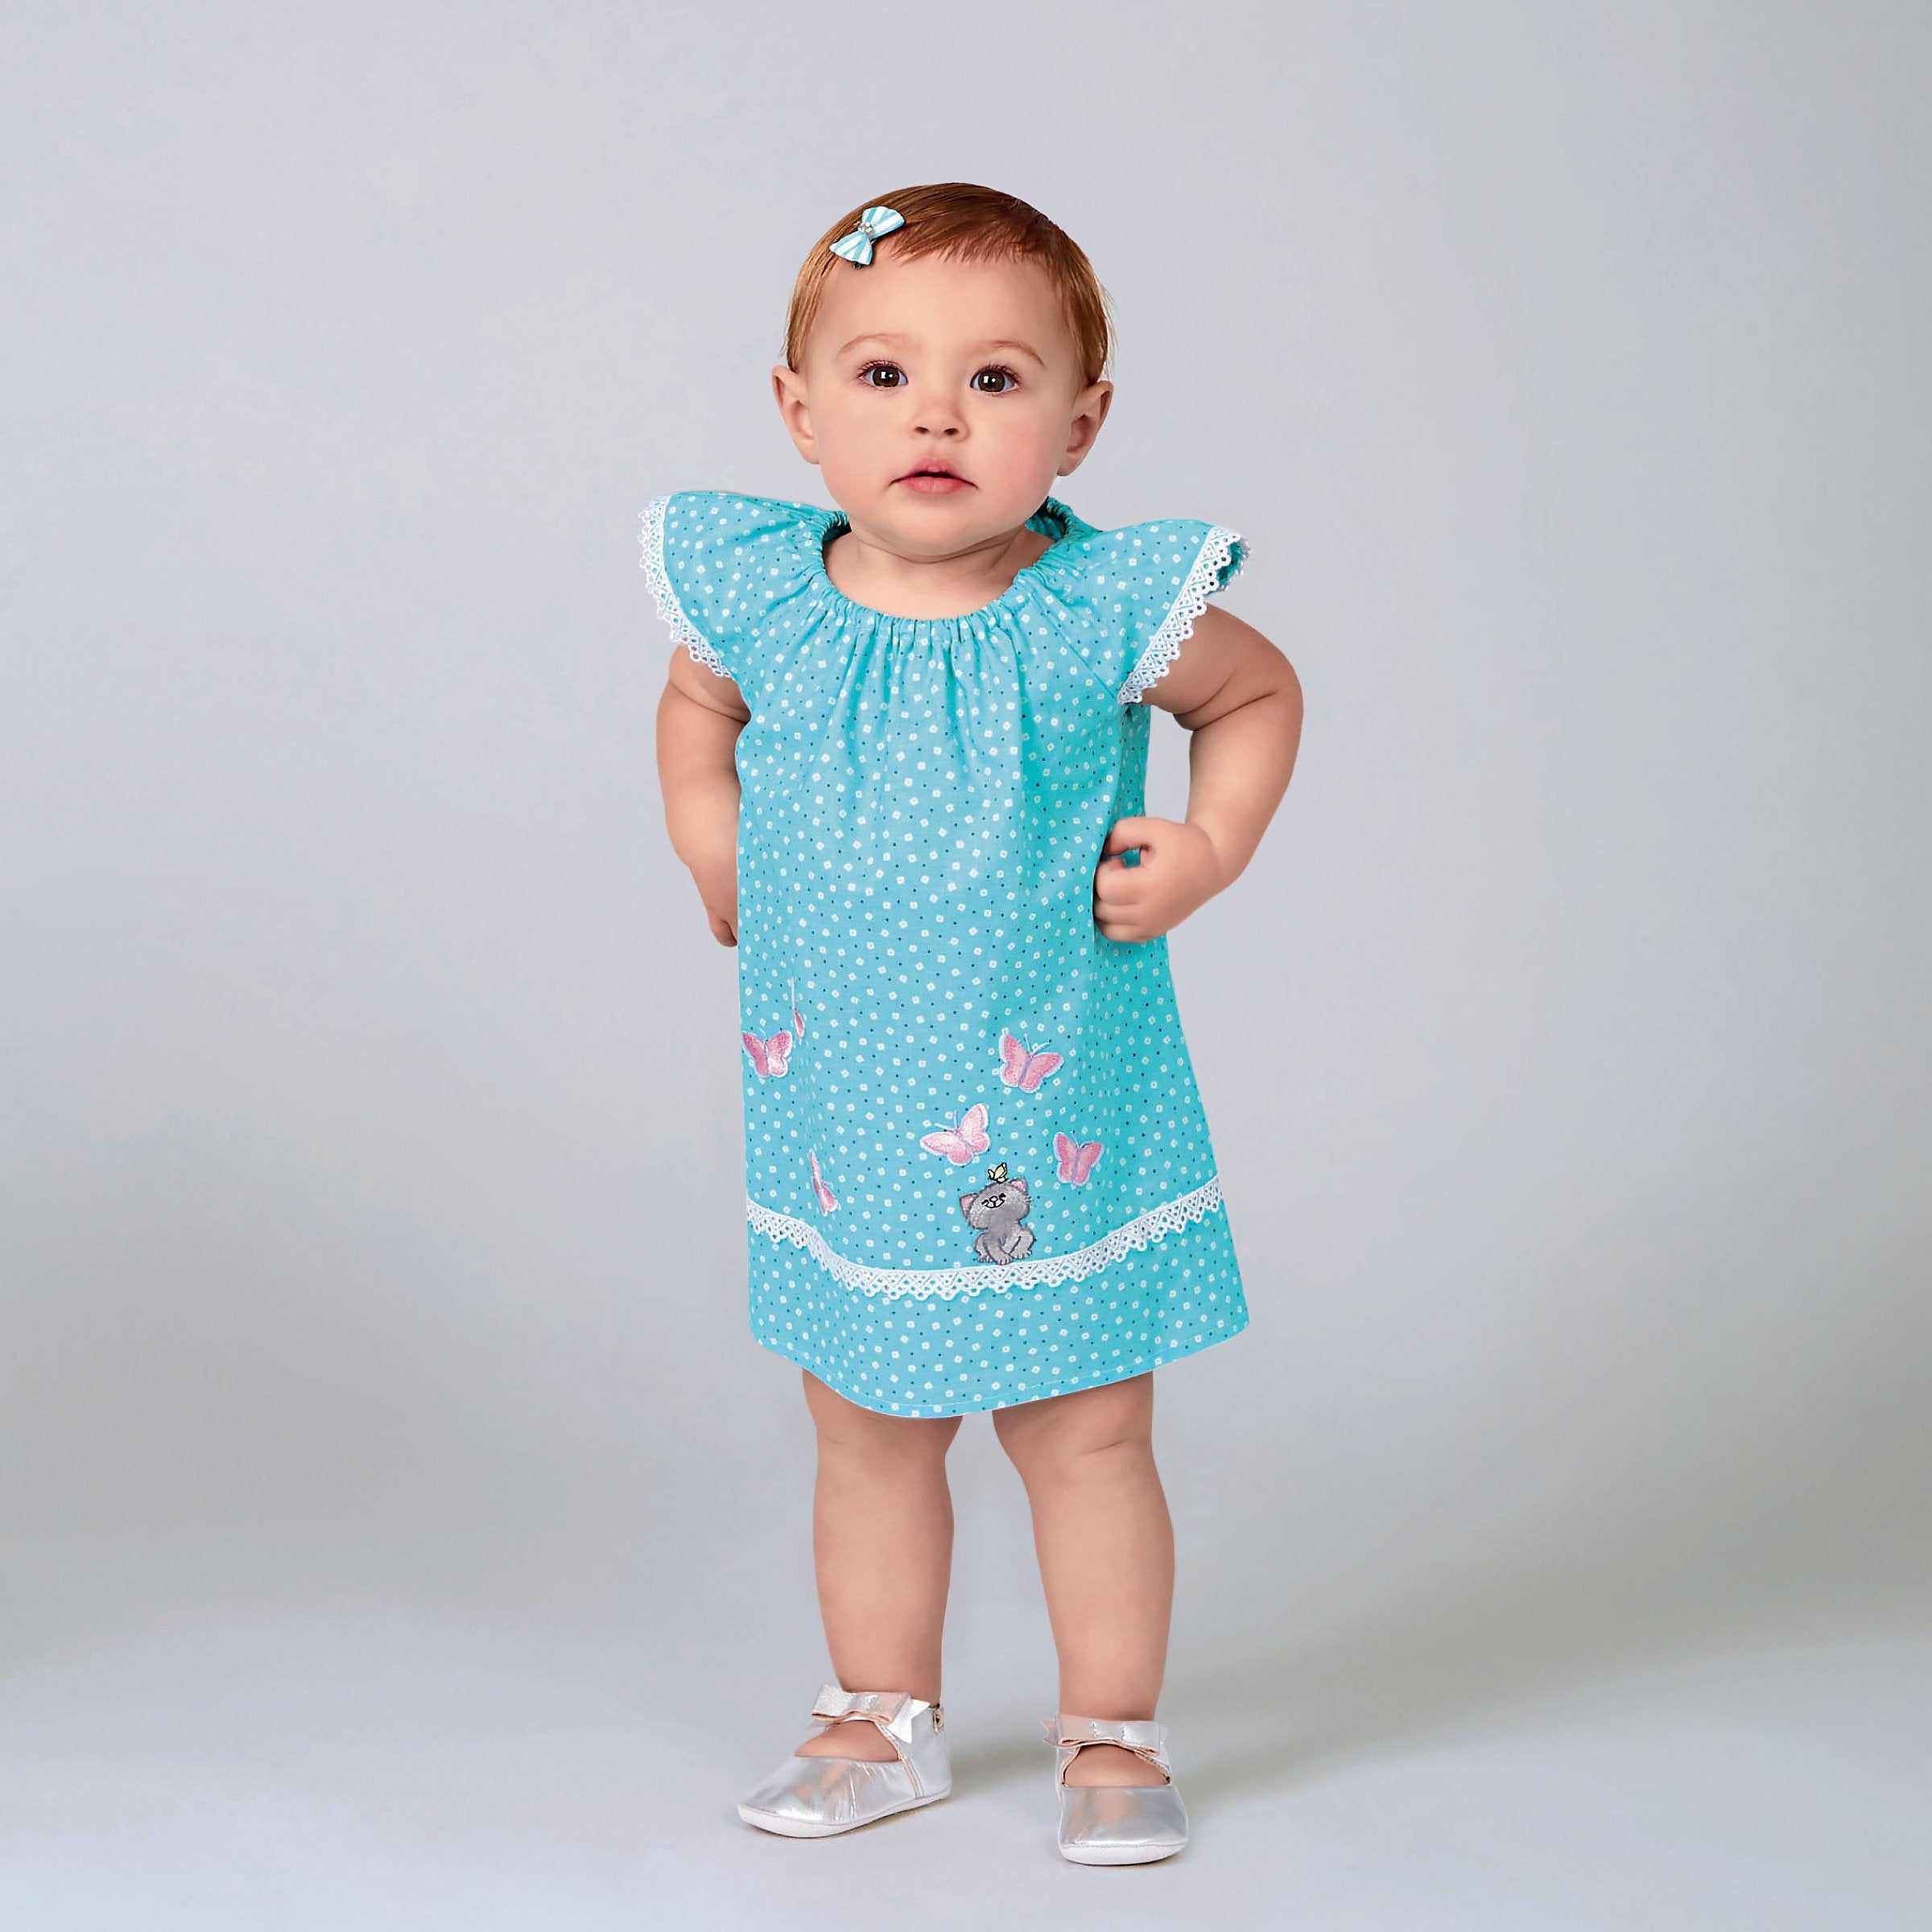 New Look Sewing Pattern 6663 Infants' Dress from Jaycotts Sewing Supplies